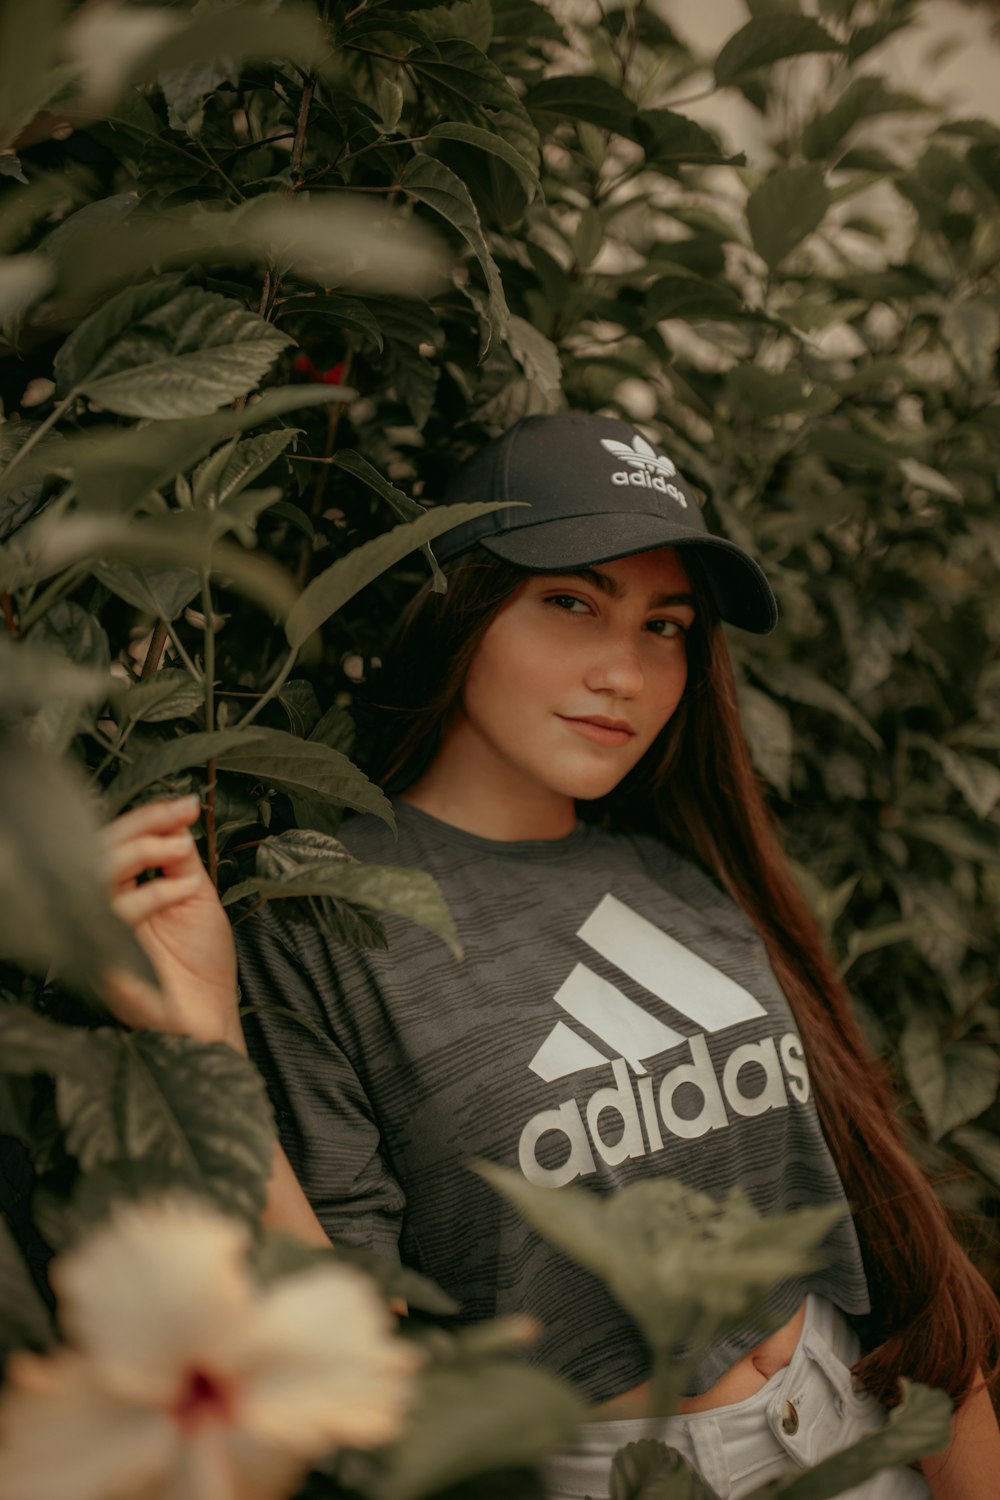 Woman in gray adidas shirt and cap leaning green photo – Free Clothing Image on Unsplash